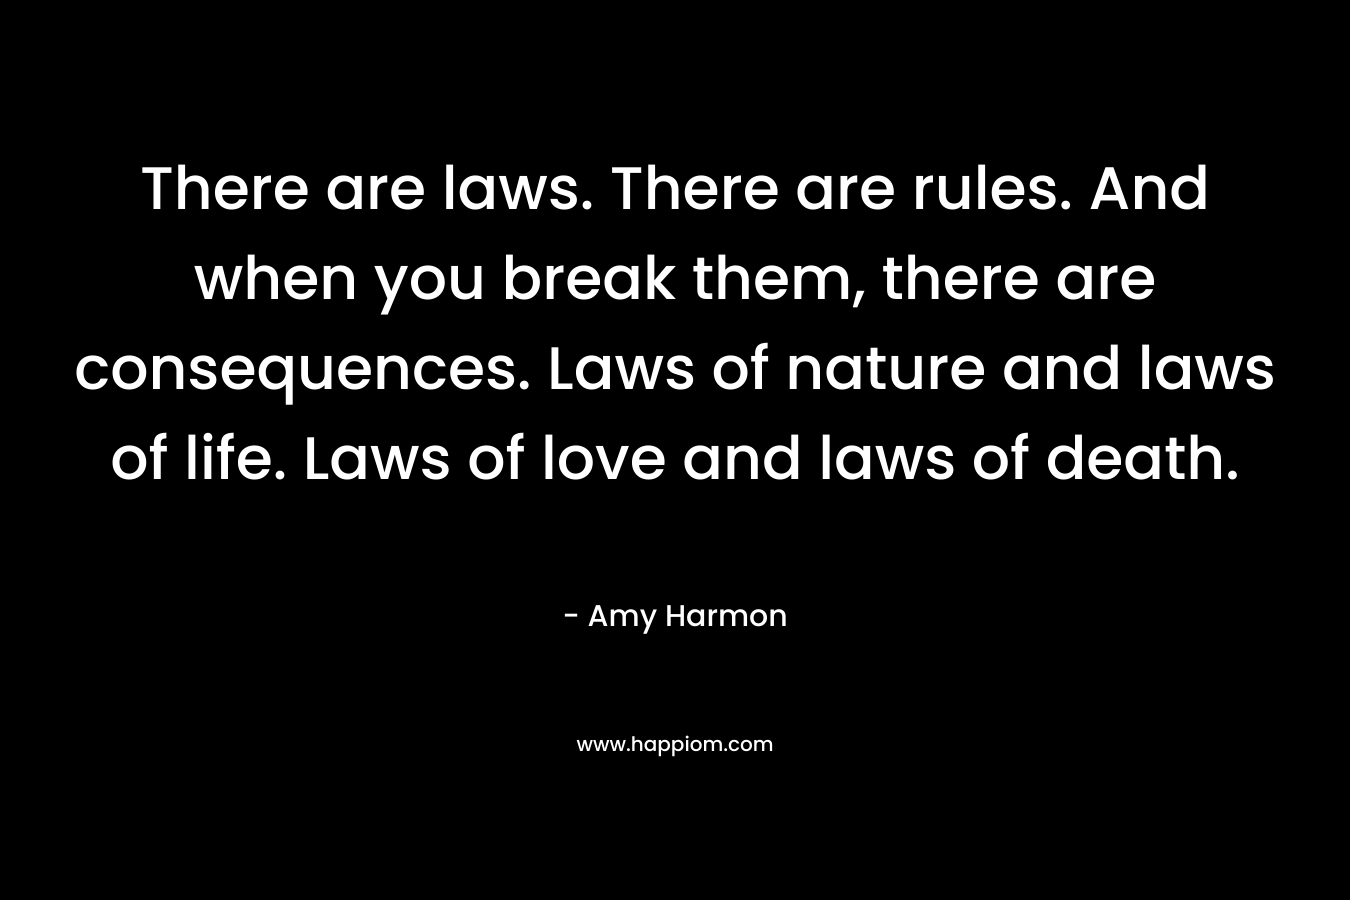 There are laws. There are rules. And when you break them, there are consequences. Laws of nature and laws of life. Laws of love and laws of death.